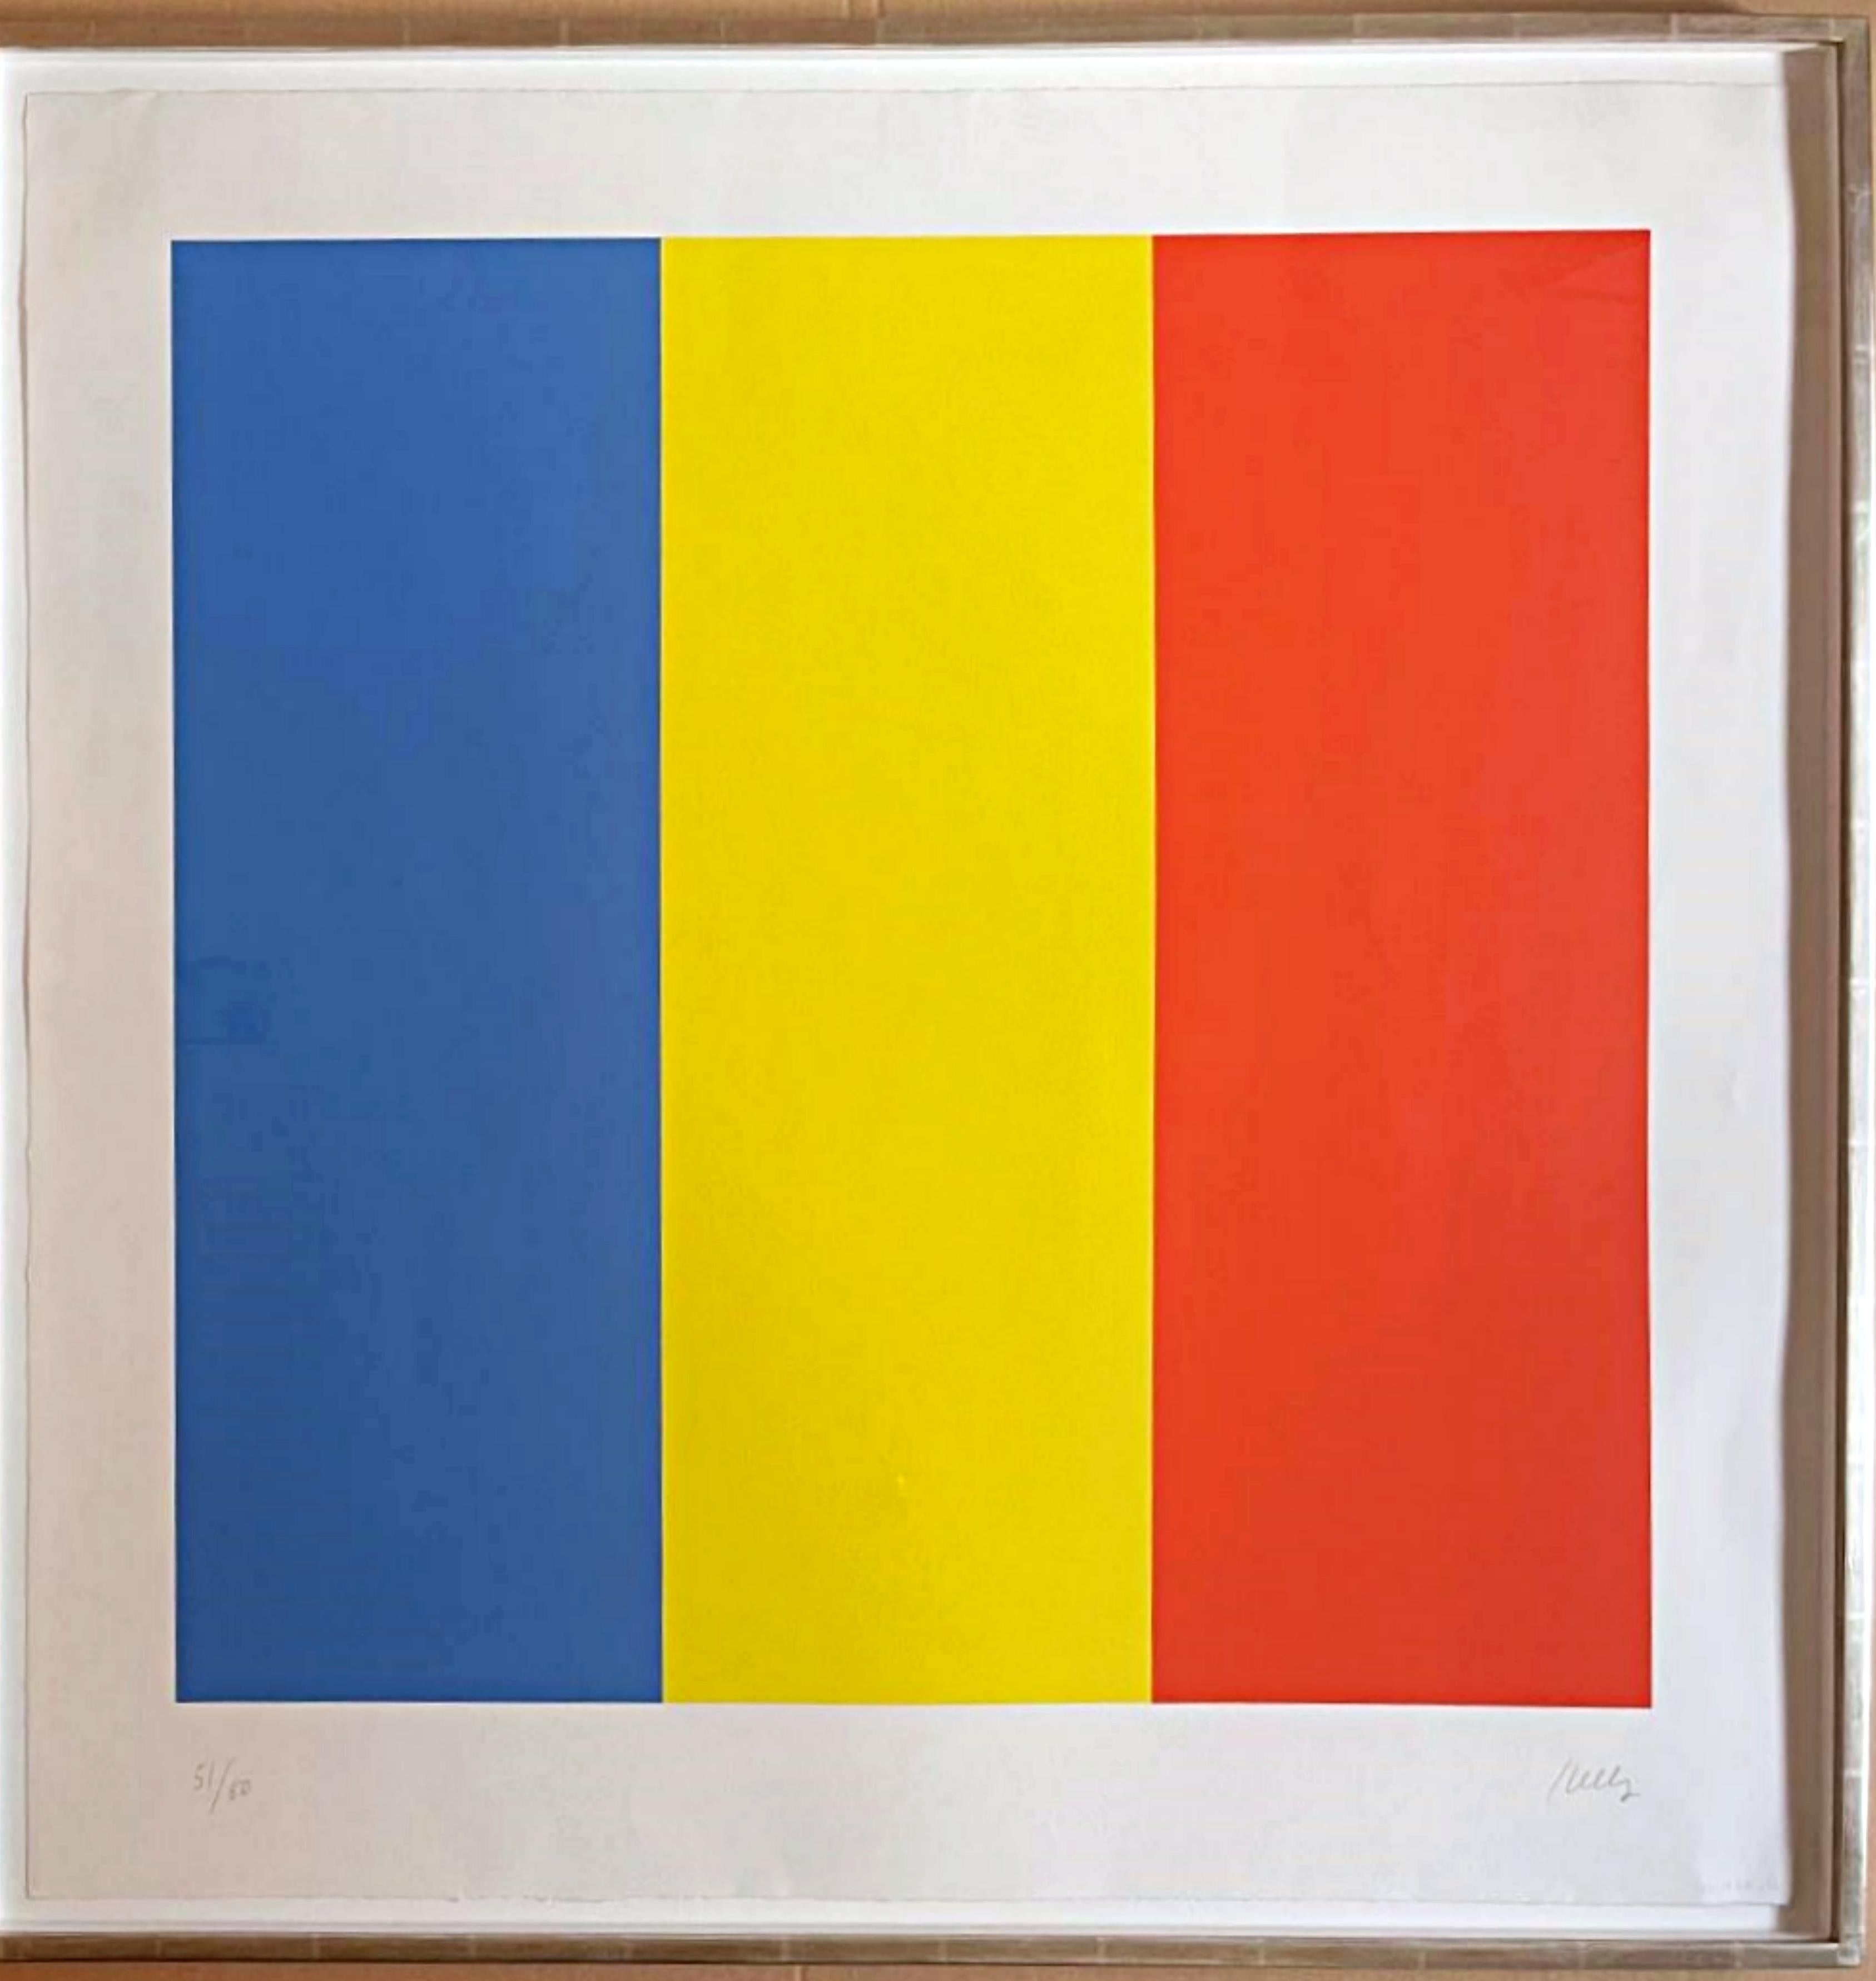 Ellsworth Kelly
Blue / Yellow / Red, 1992
Color lithograph on Rives BFK paper
Signed lower right and numbered 51/80 lower left
Frame Included: held in original hand made gold leaf frame with UV plexiglass (labels verso)
Dazzling large (over three